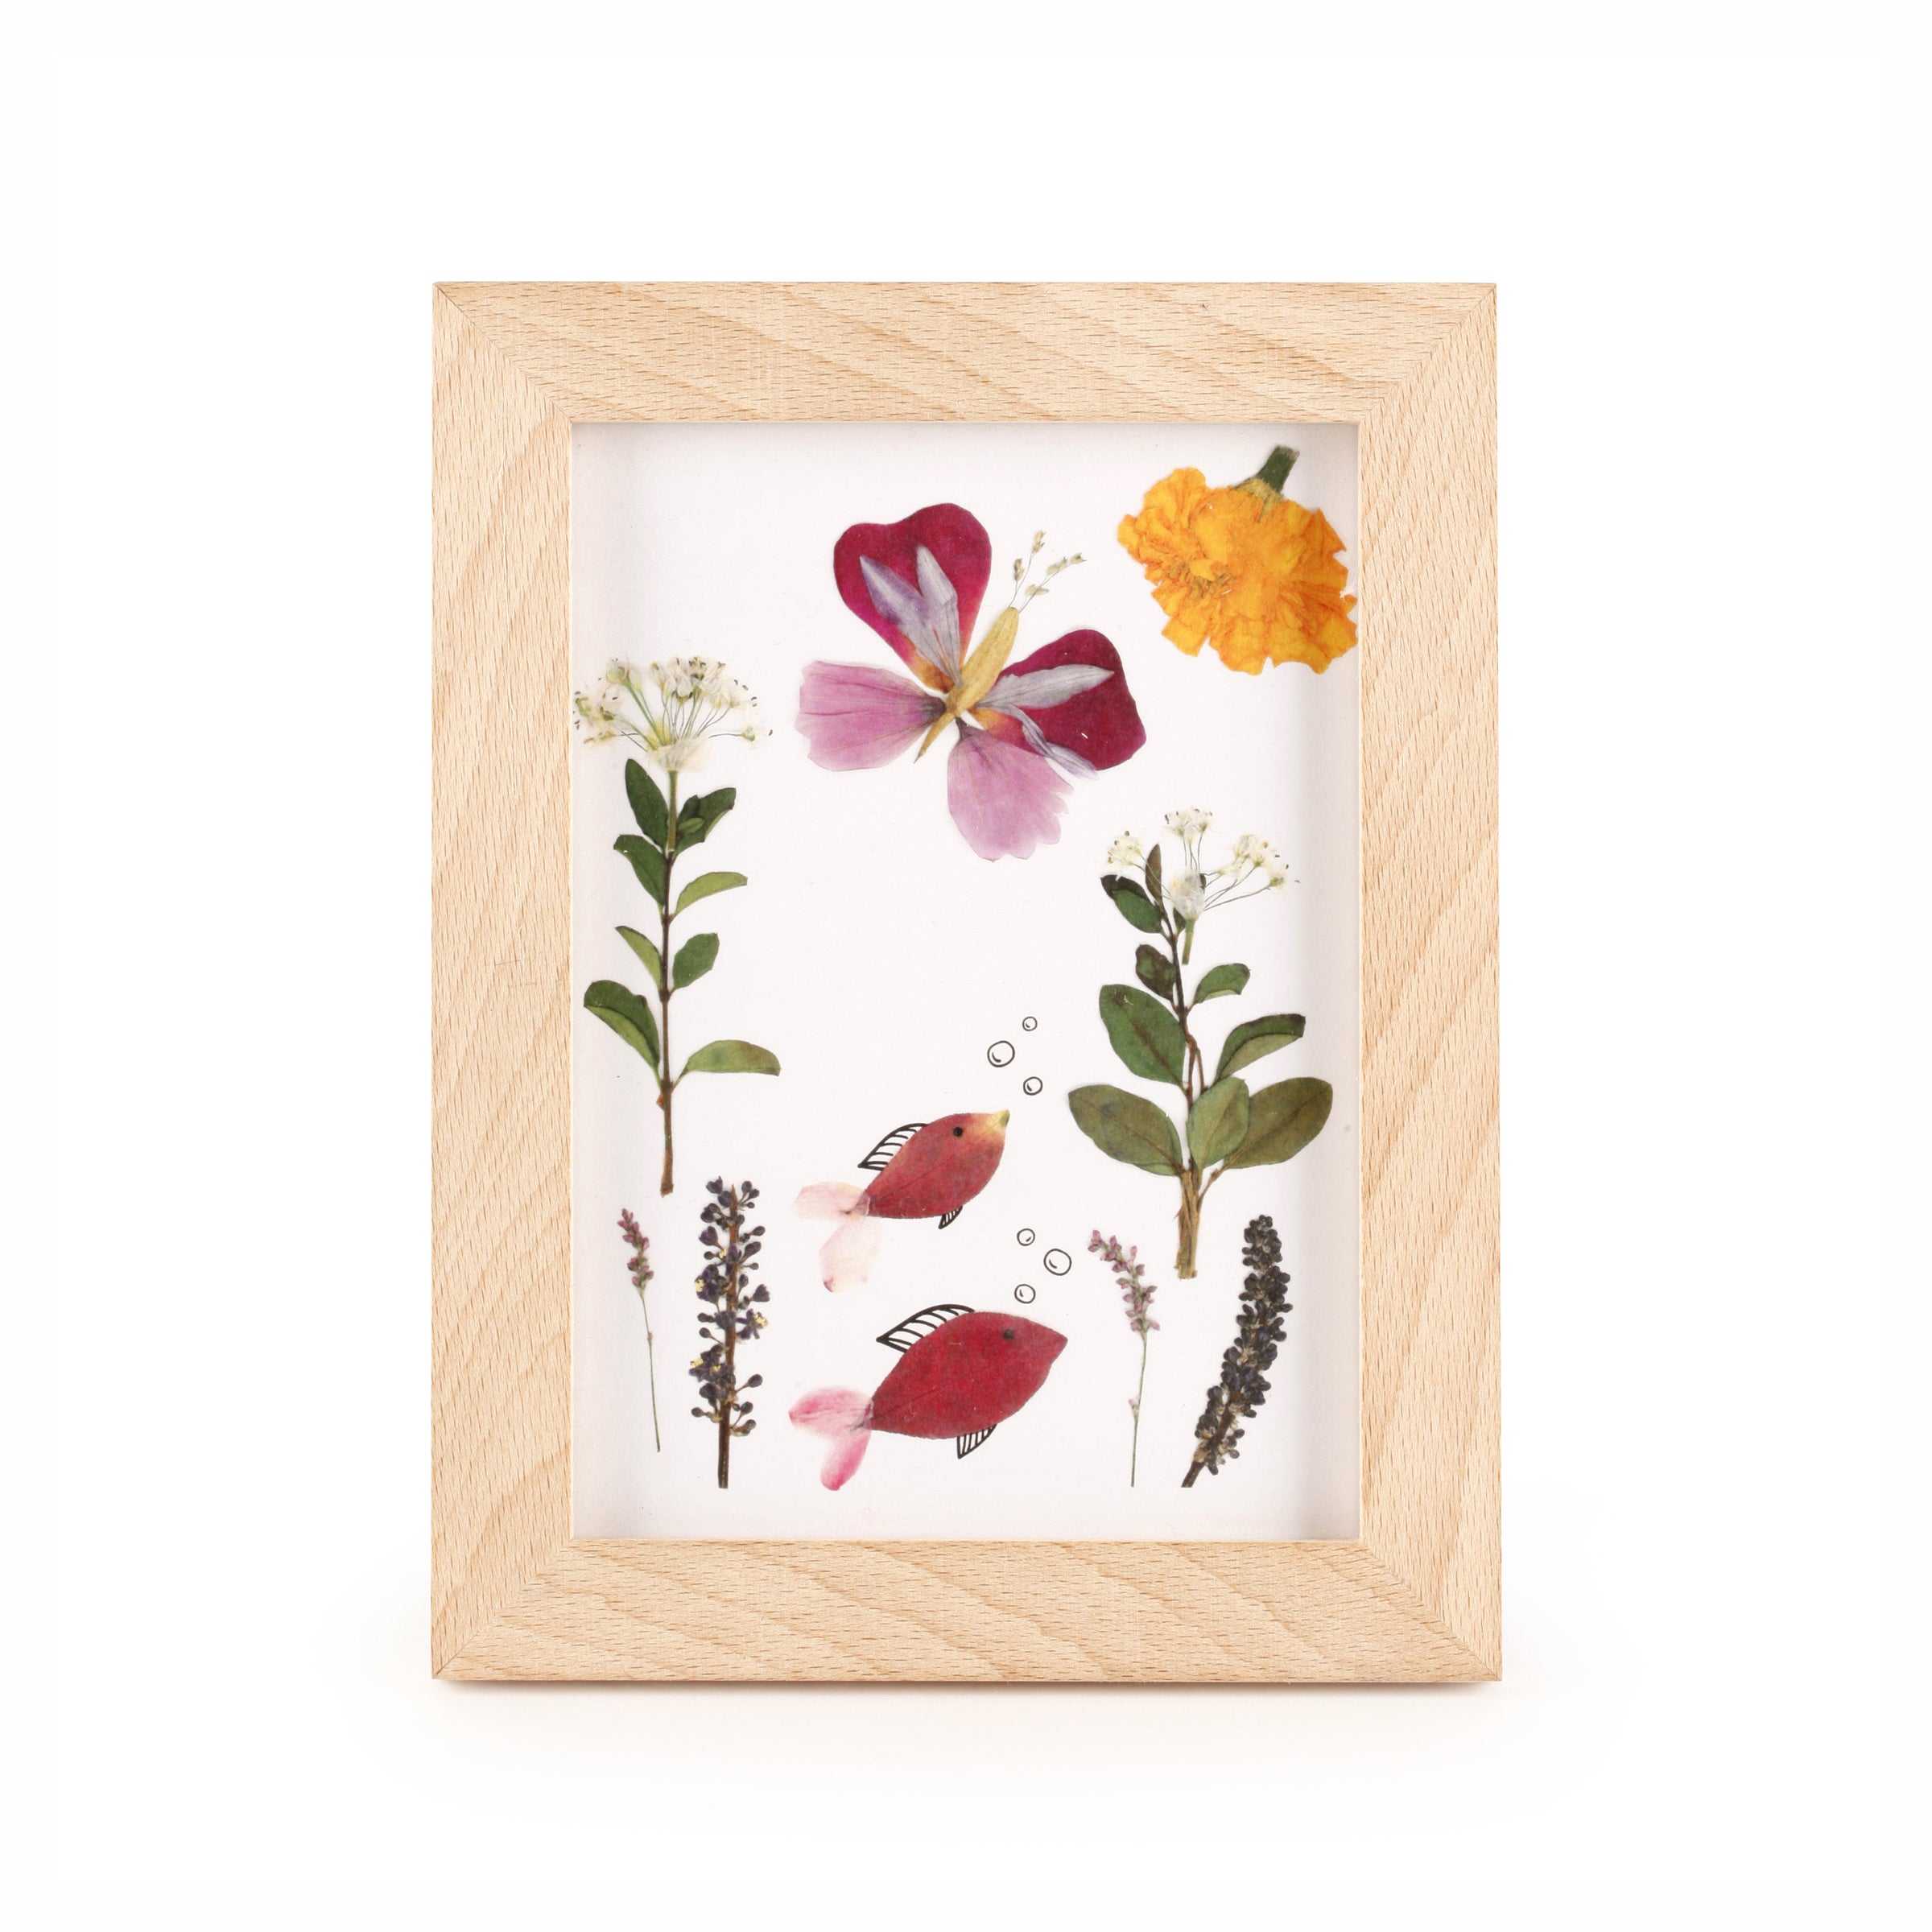 How to Make Pressed Flower Art